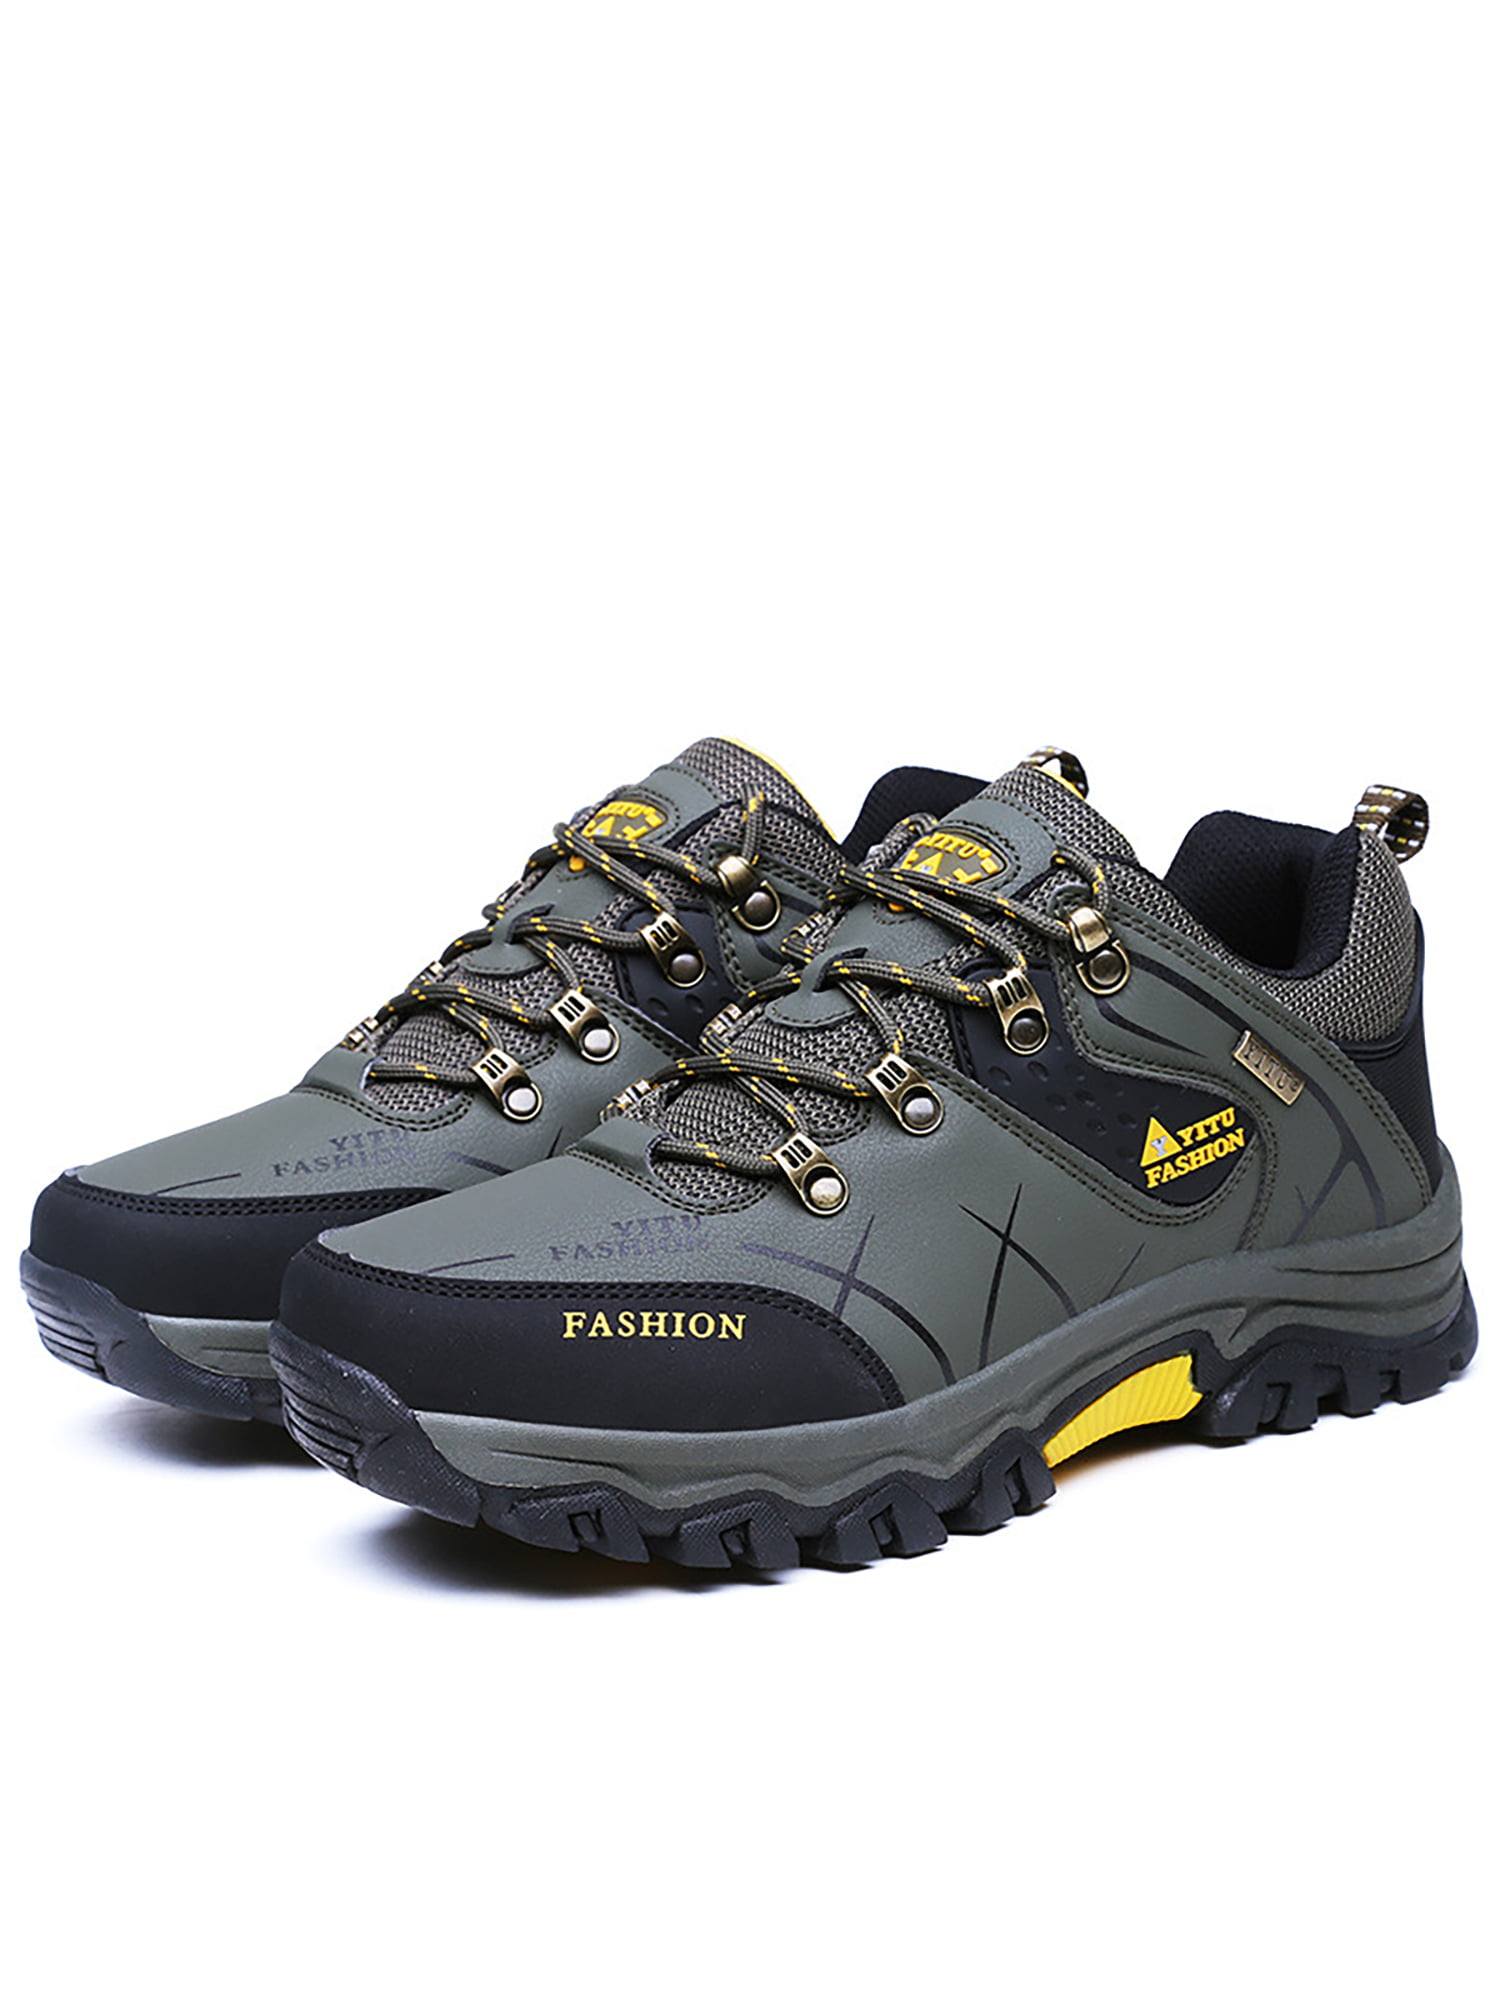 Hiking Shoes Outdoor Shock Absorption Hiking Breathable Off-Road shoes-black-45 